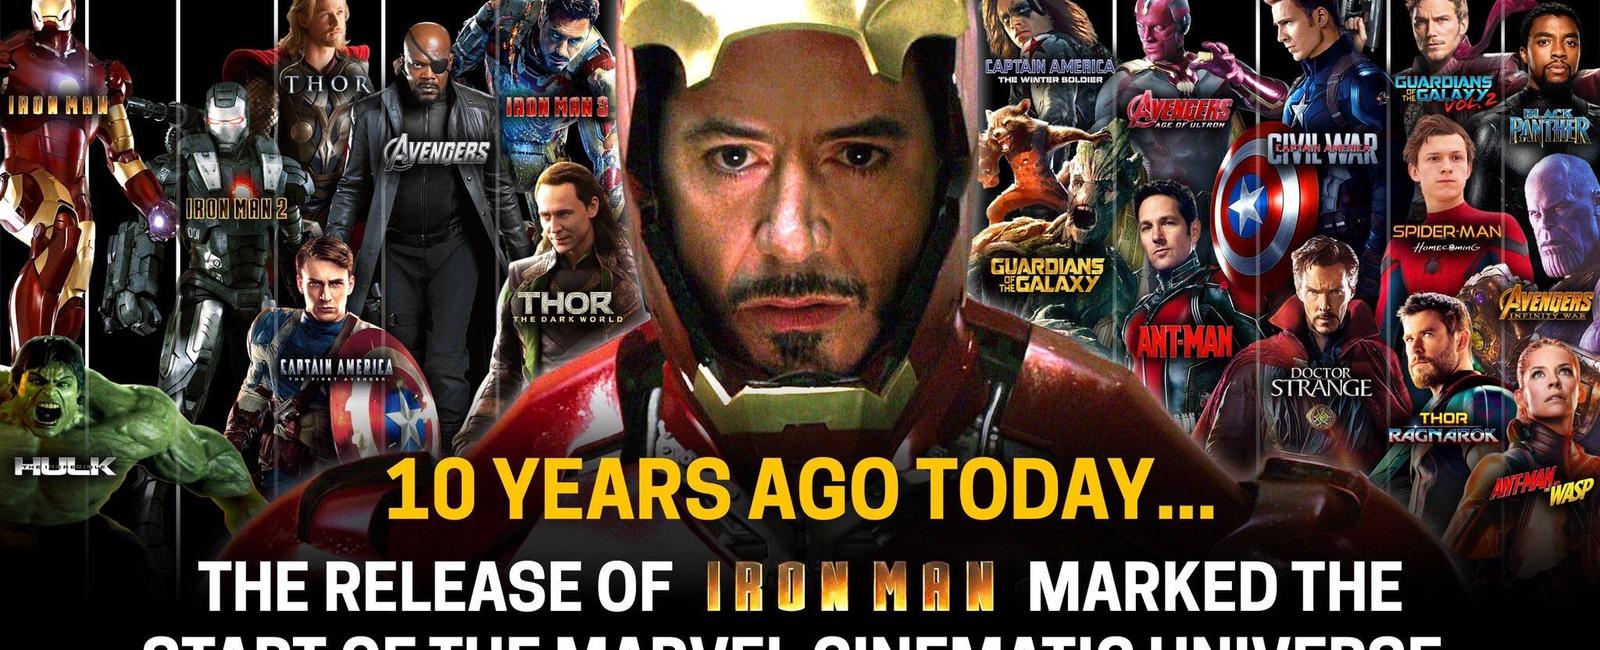 Iron man began filming before the script was completed there was a rough outline but producers thought improvisation would lead to more authentic performances